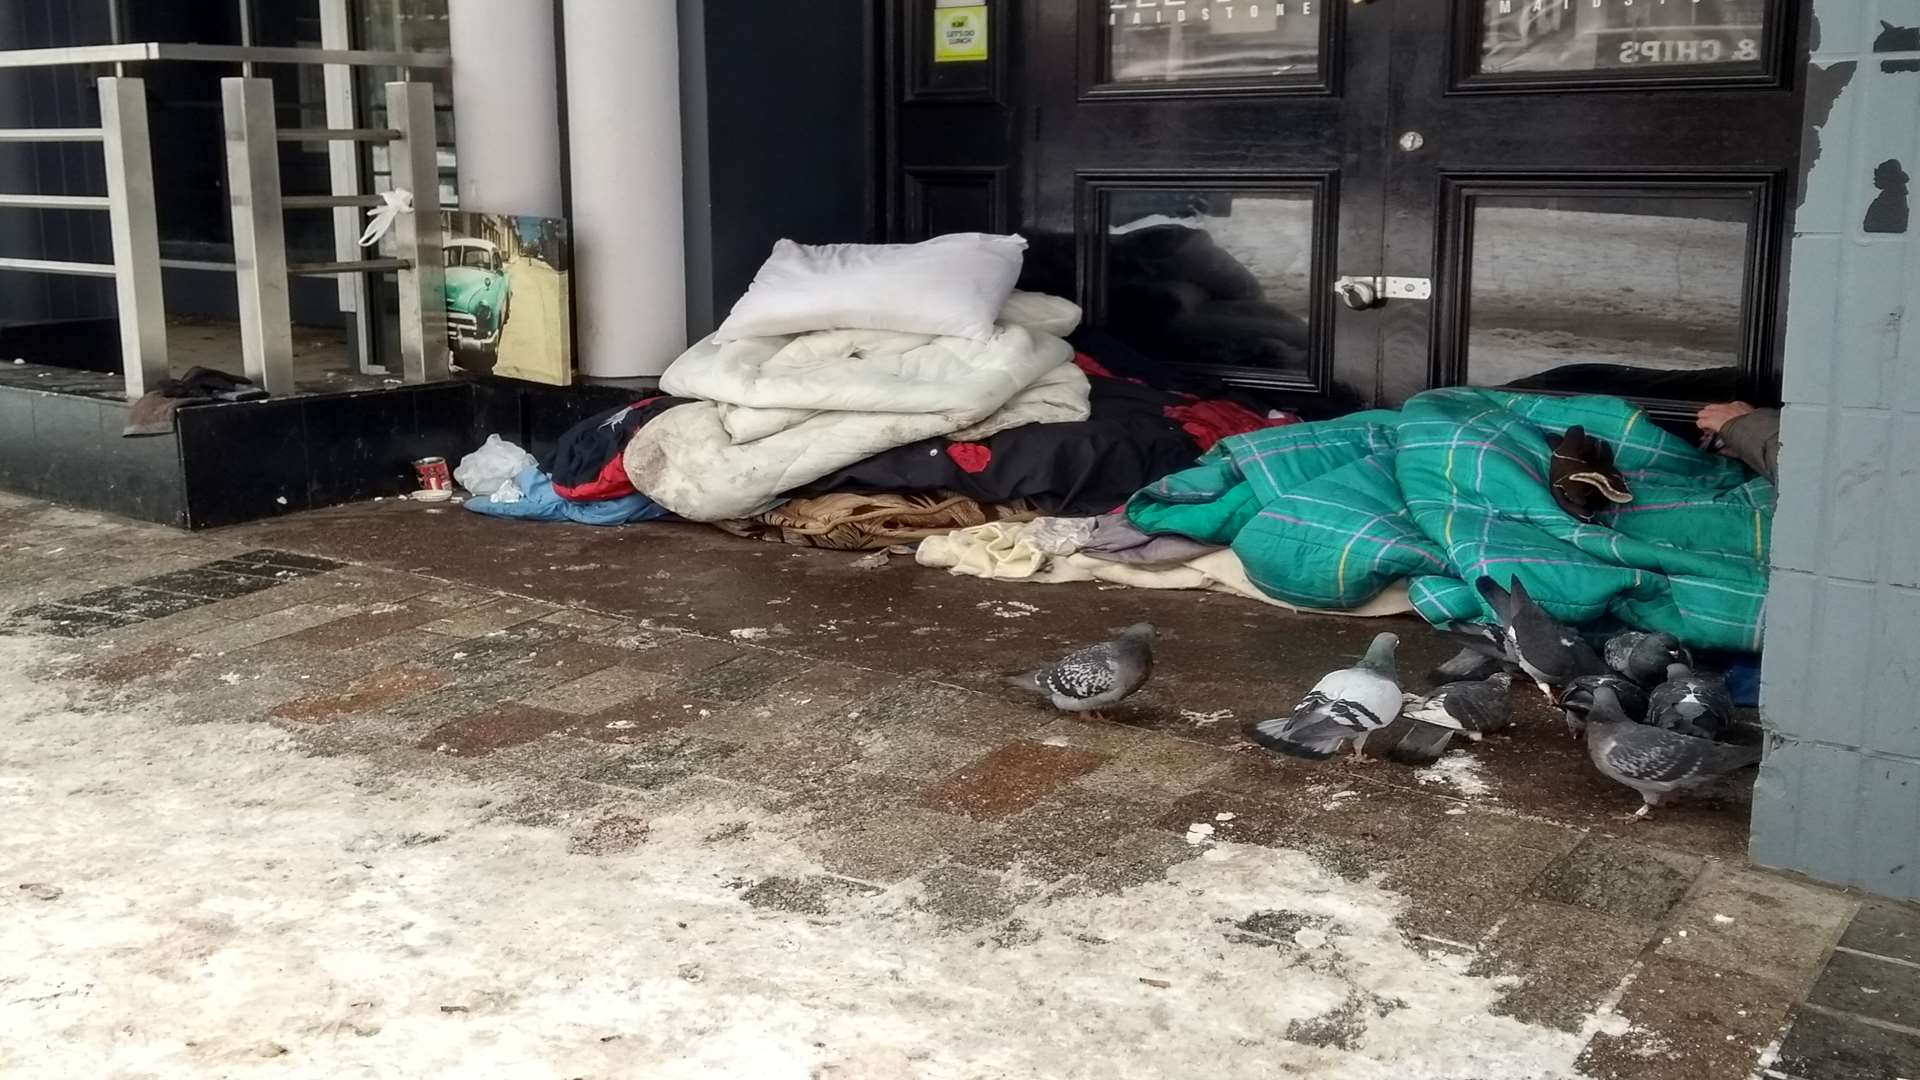 Some homeless people remain outdoors despite the cold